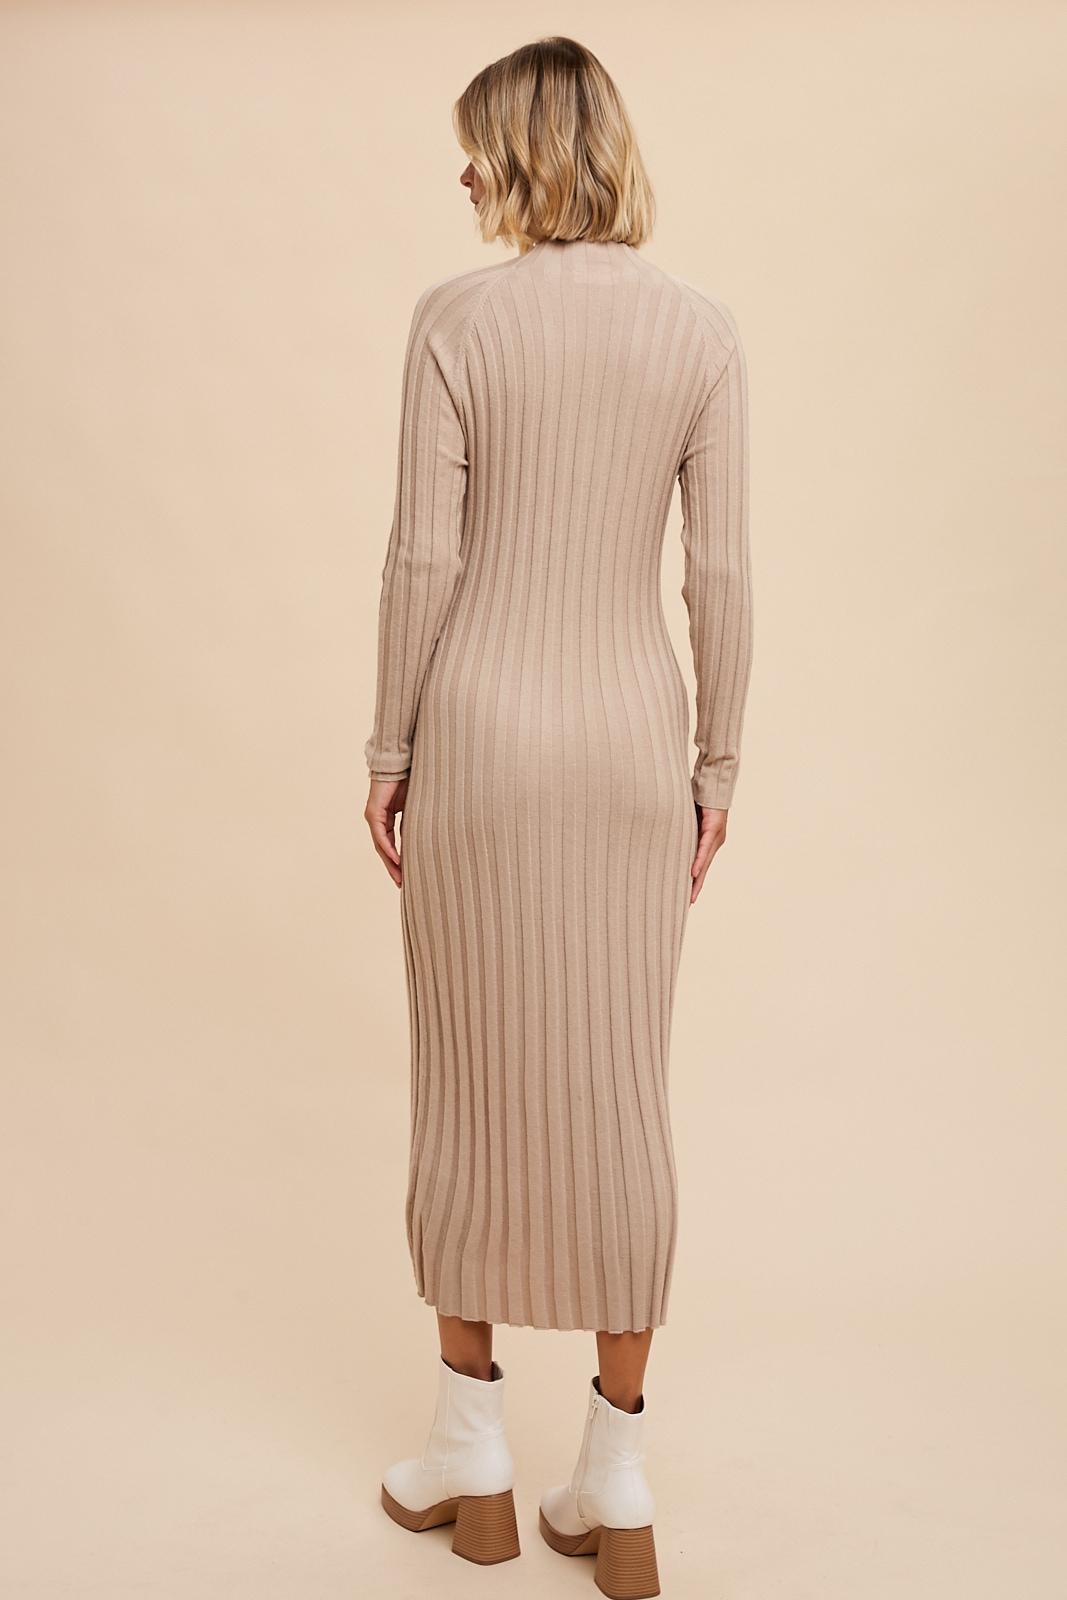 Dominic Ribbed Knit Sweater Dress in Almond